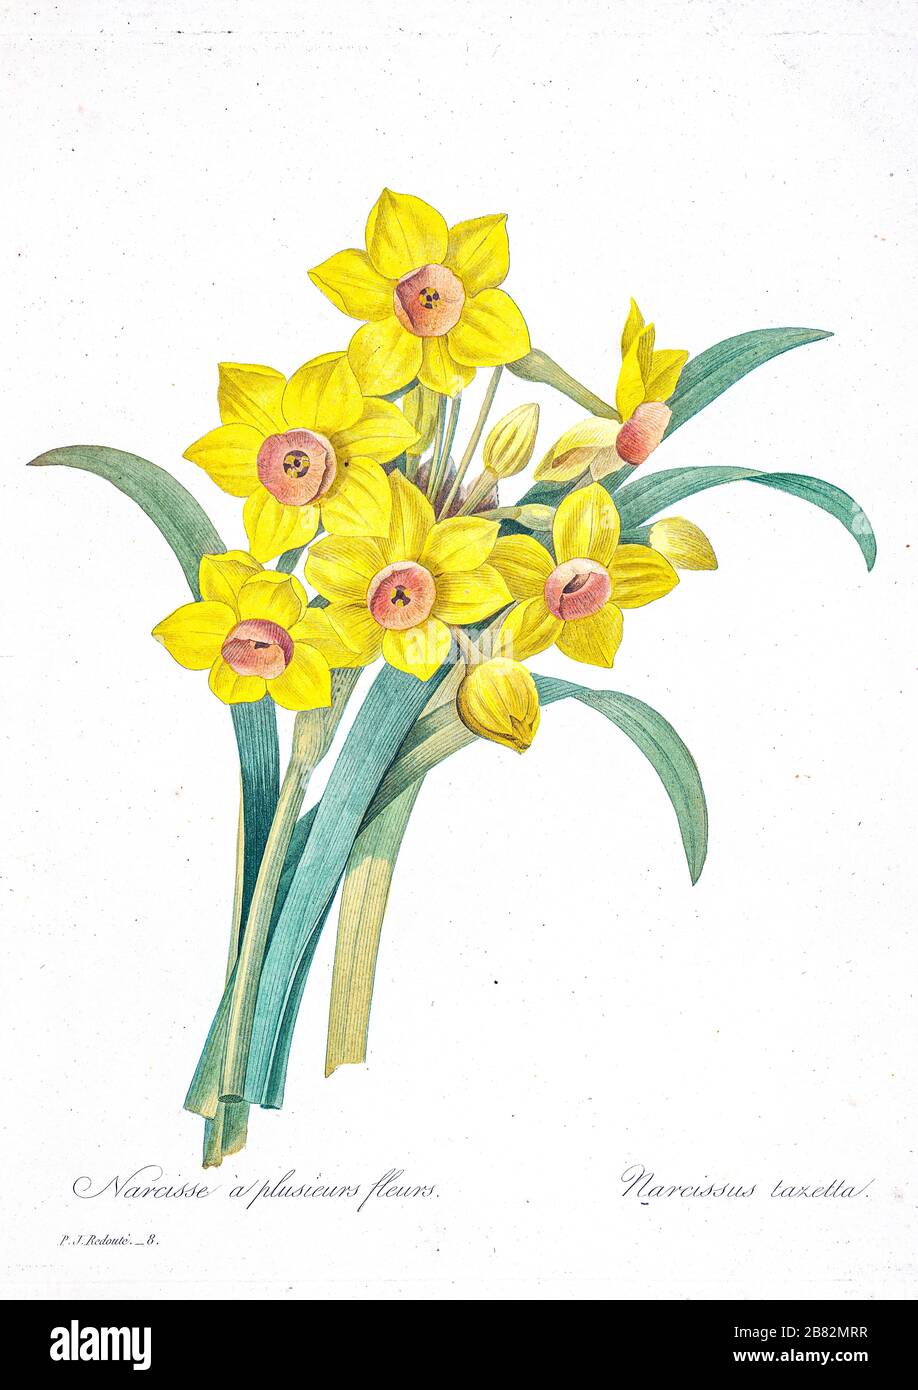 19th-century hand painted Engraving illustration of Narcissus tazetta (bunch-flowered narcissus, bunch-flowered daffodil flowers, by Pierre-Joseph Redoute. Published in Choix Des Plus Belles Fleurs, Paris (1827). by Redouté, Pierre Joseph, 1759-1840.; Chapuis, Jean Baptiste.; Ernest Panckoucke.; Langois, Dr.; Bessin, R.; Victor, fl. ca. 1820-1850. Stock Photo